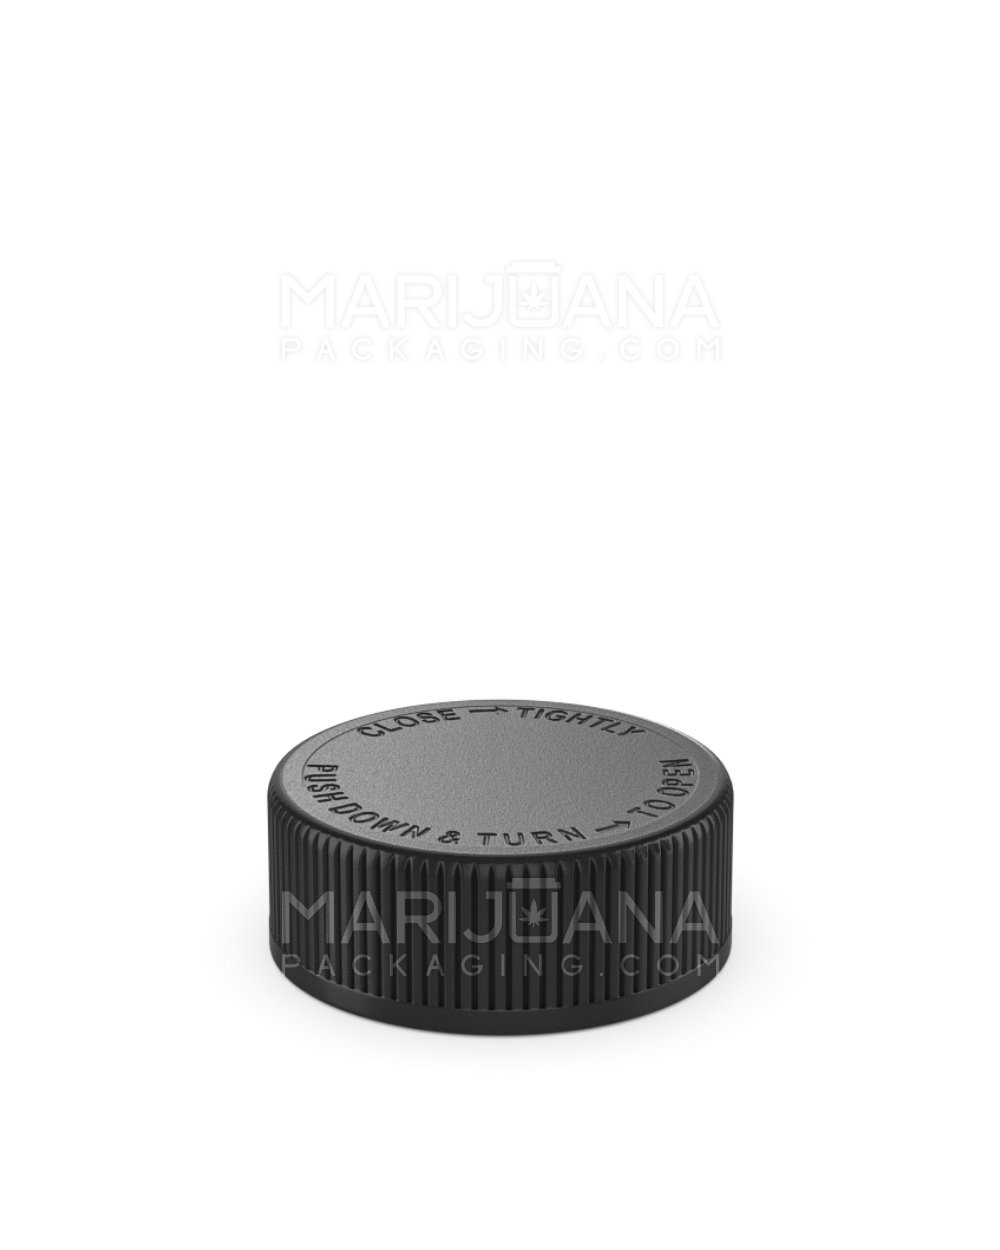 Child Resistant | Ribbed Push Down and Turn Plastic Caps w/ Text & Foam Liner | 38mm - Semi Gloss Black - 84 Count - 3